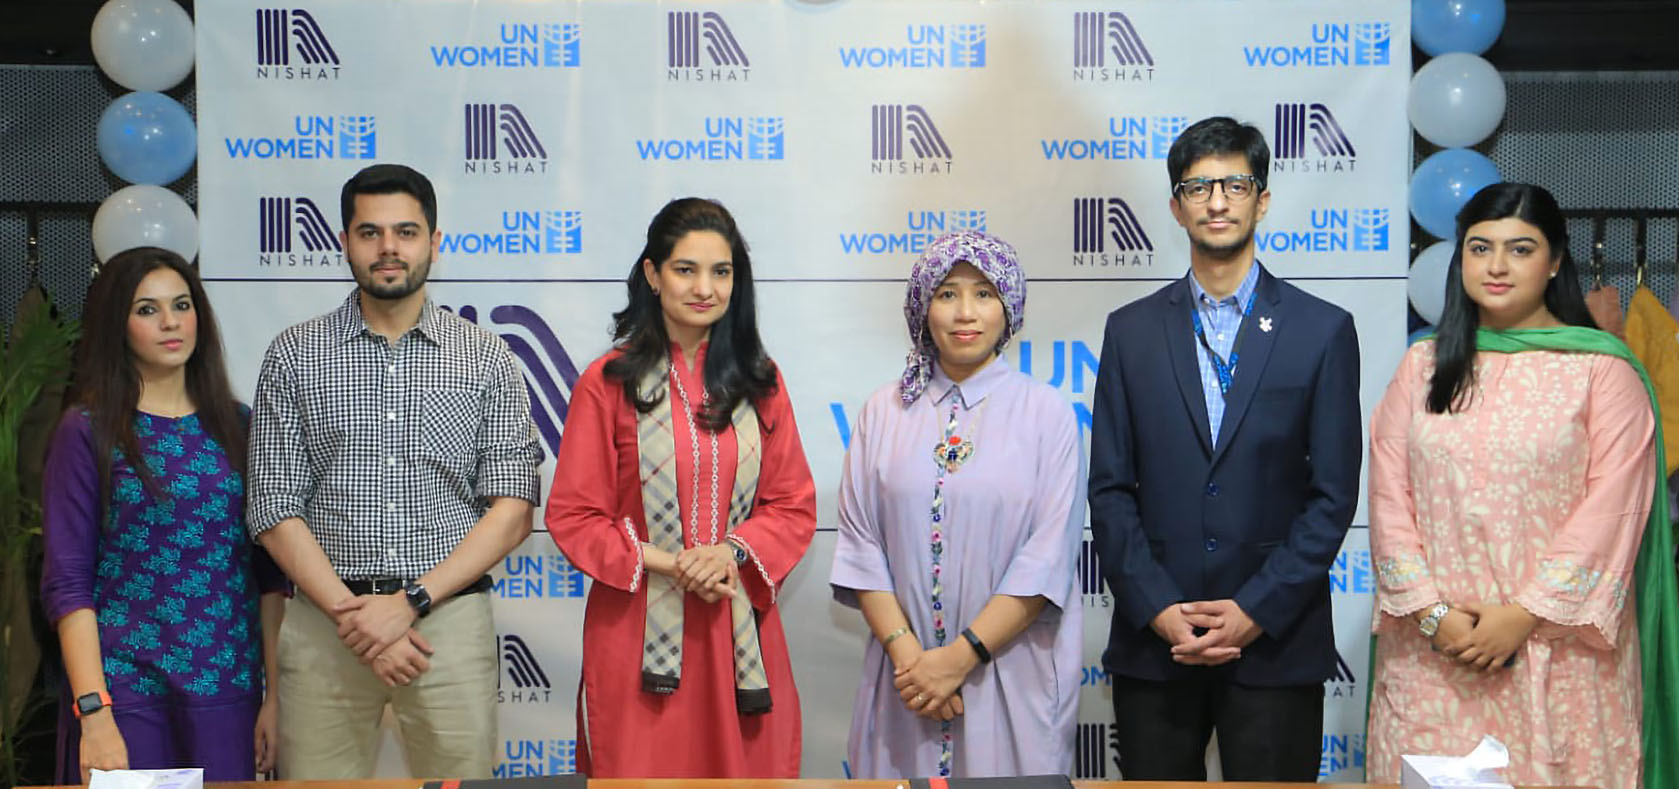 Representatives from UN Women Pakistan and Nishat Mills Limited (Apparel Division) at the signing ceremony to strengthen their cooperation and promote gender equality in the workplaces. Photo: Nishat Apparel/Ahmed Zaheer